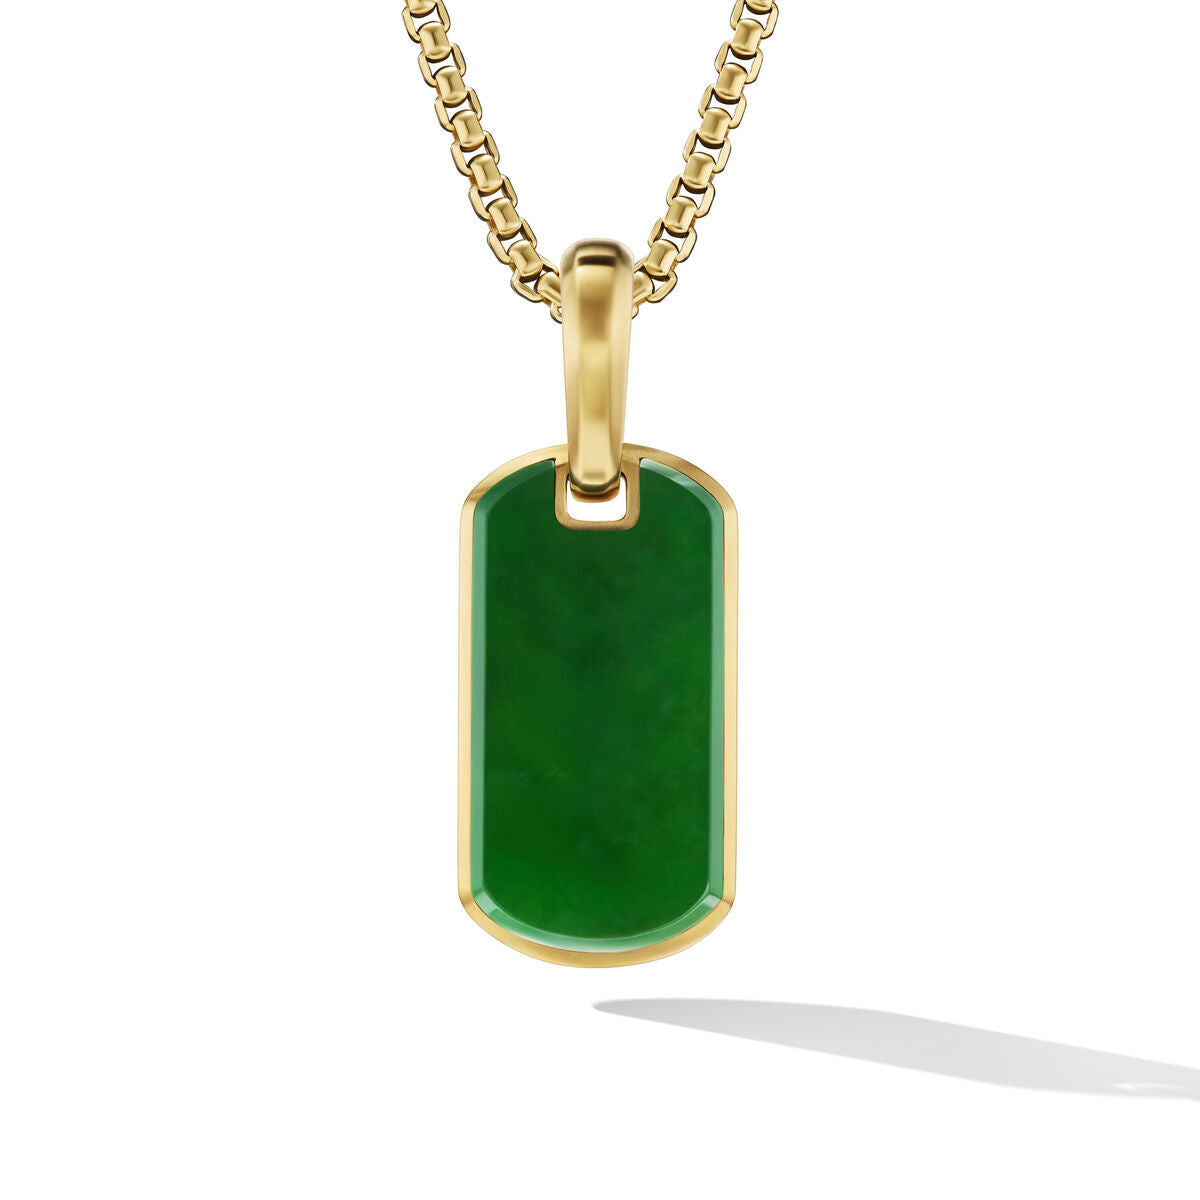 Chevron Tag in 18K Yellow Gold with Nephrite Jade, 21mm